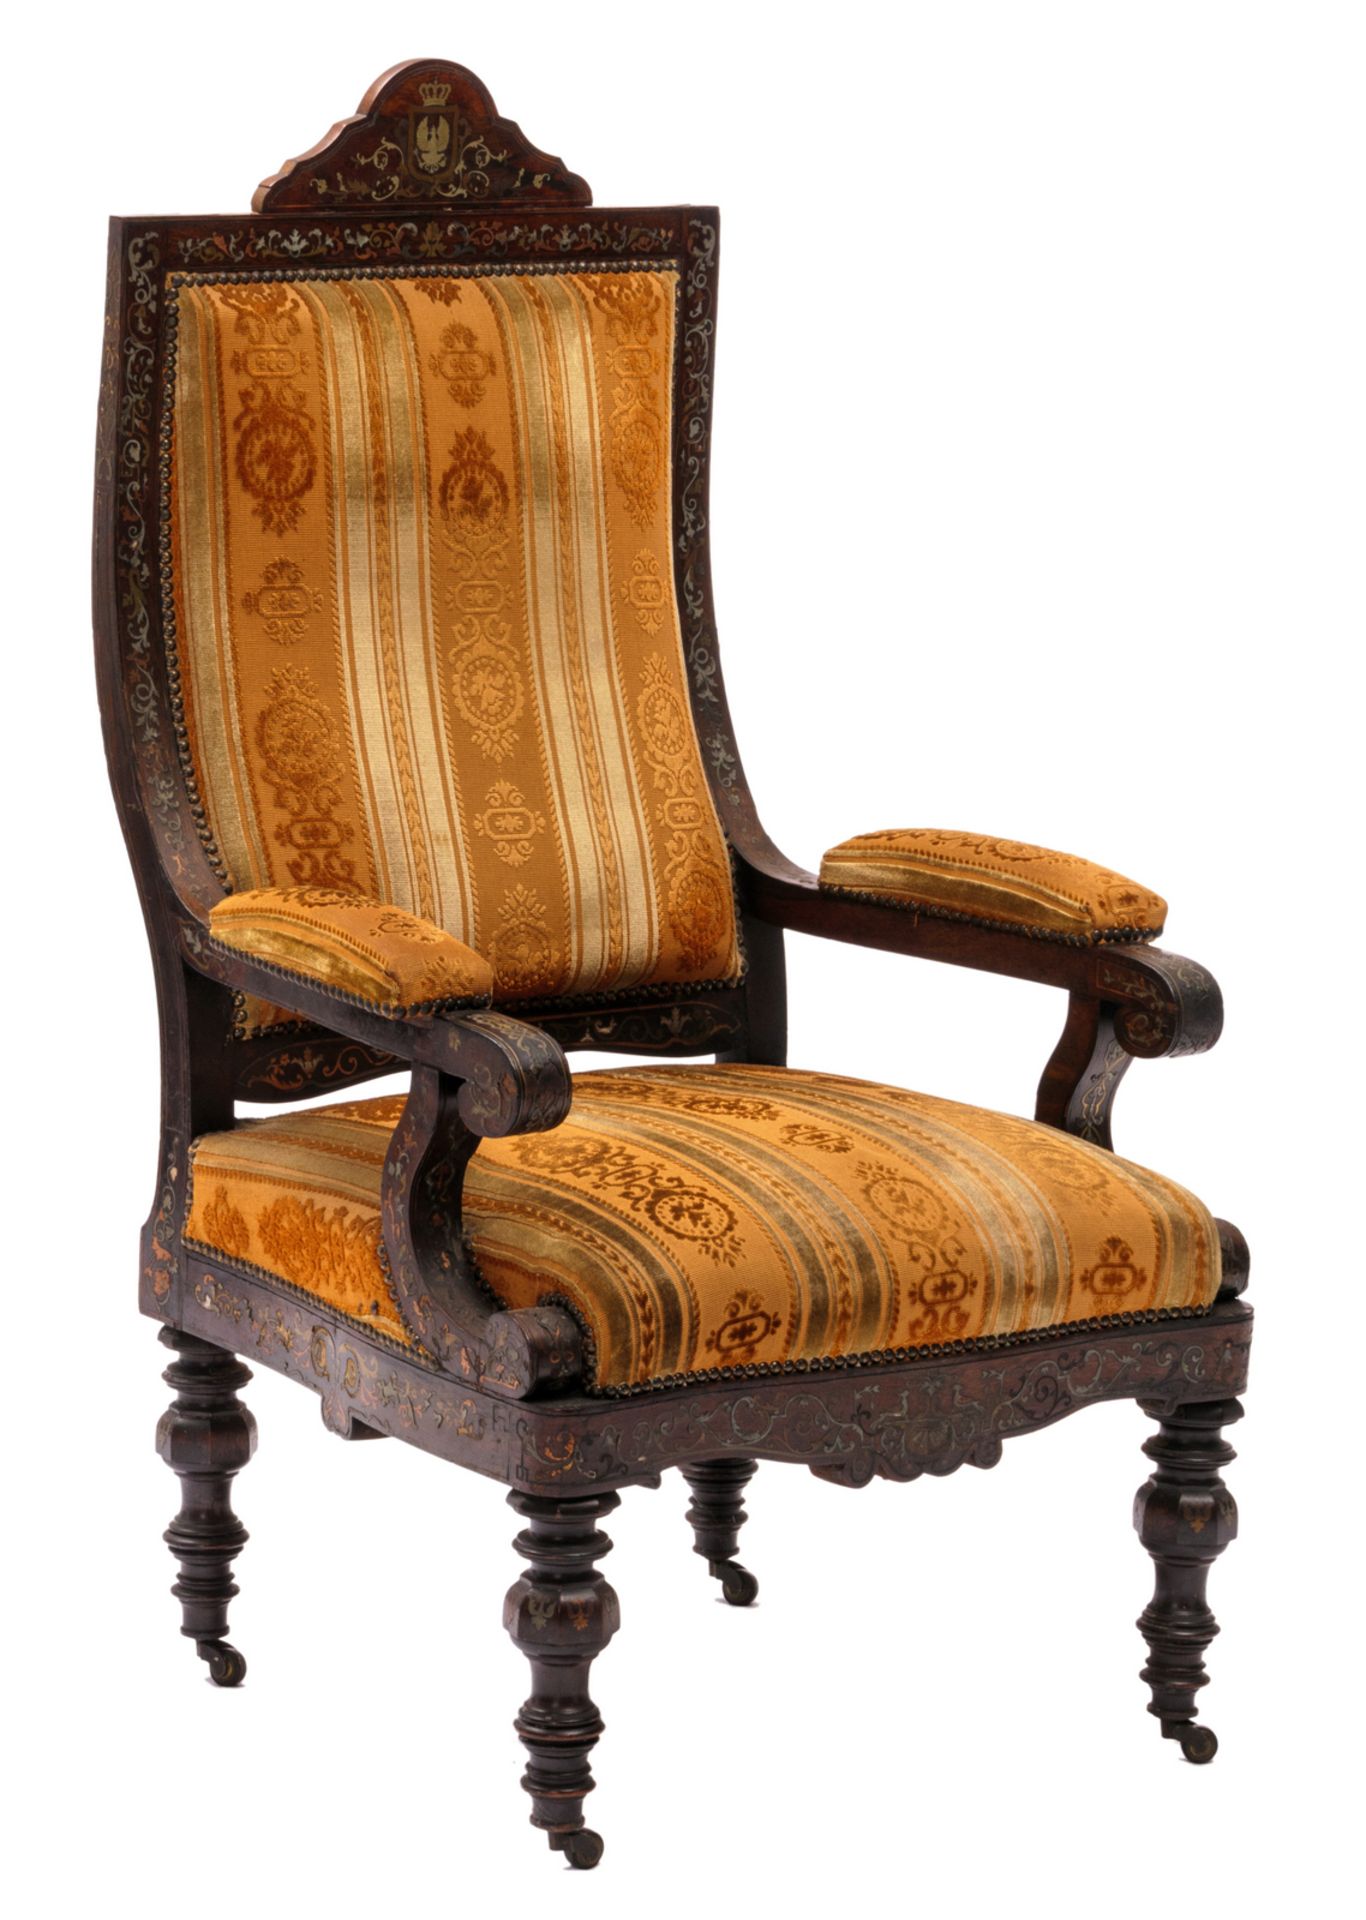 A rosewood and Boulle marquetry Baroque revival armchair, possibly Prussian, 19thC, H 123 - W 68 - D